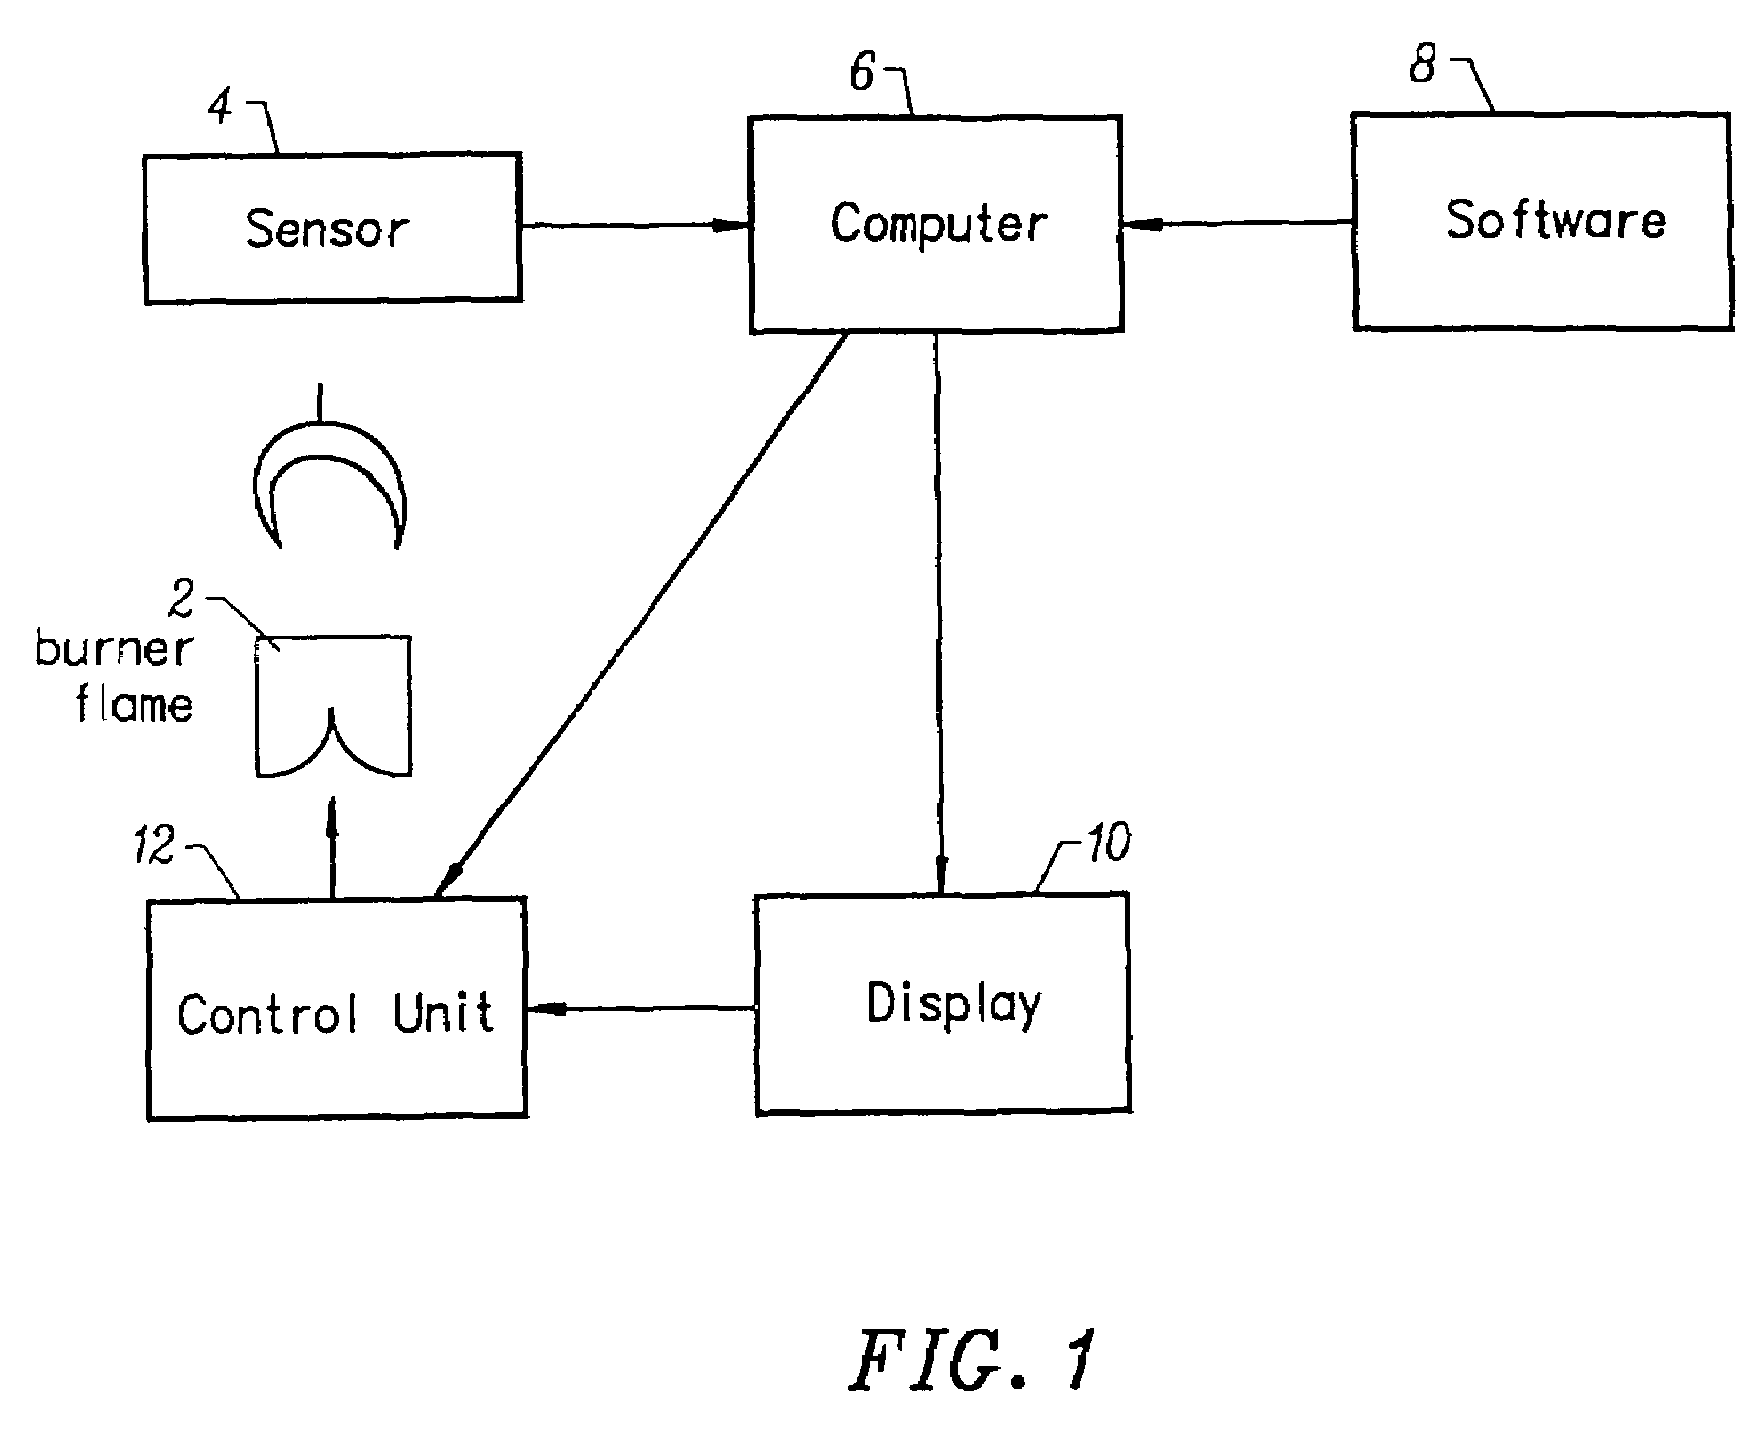 Methods for monitoring and controlling boiler flames